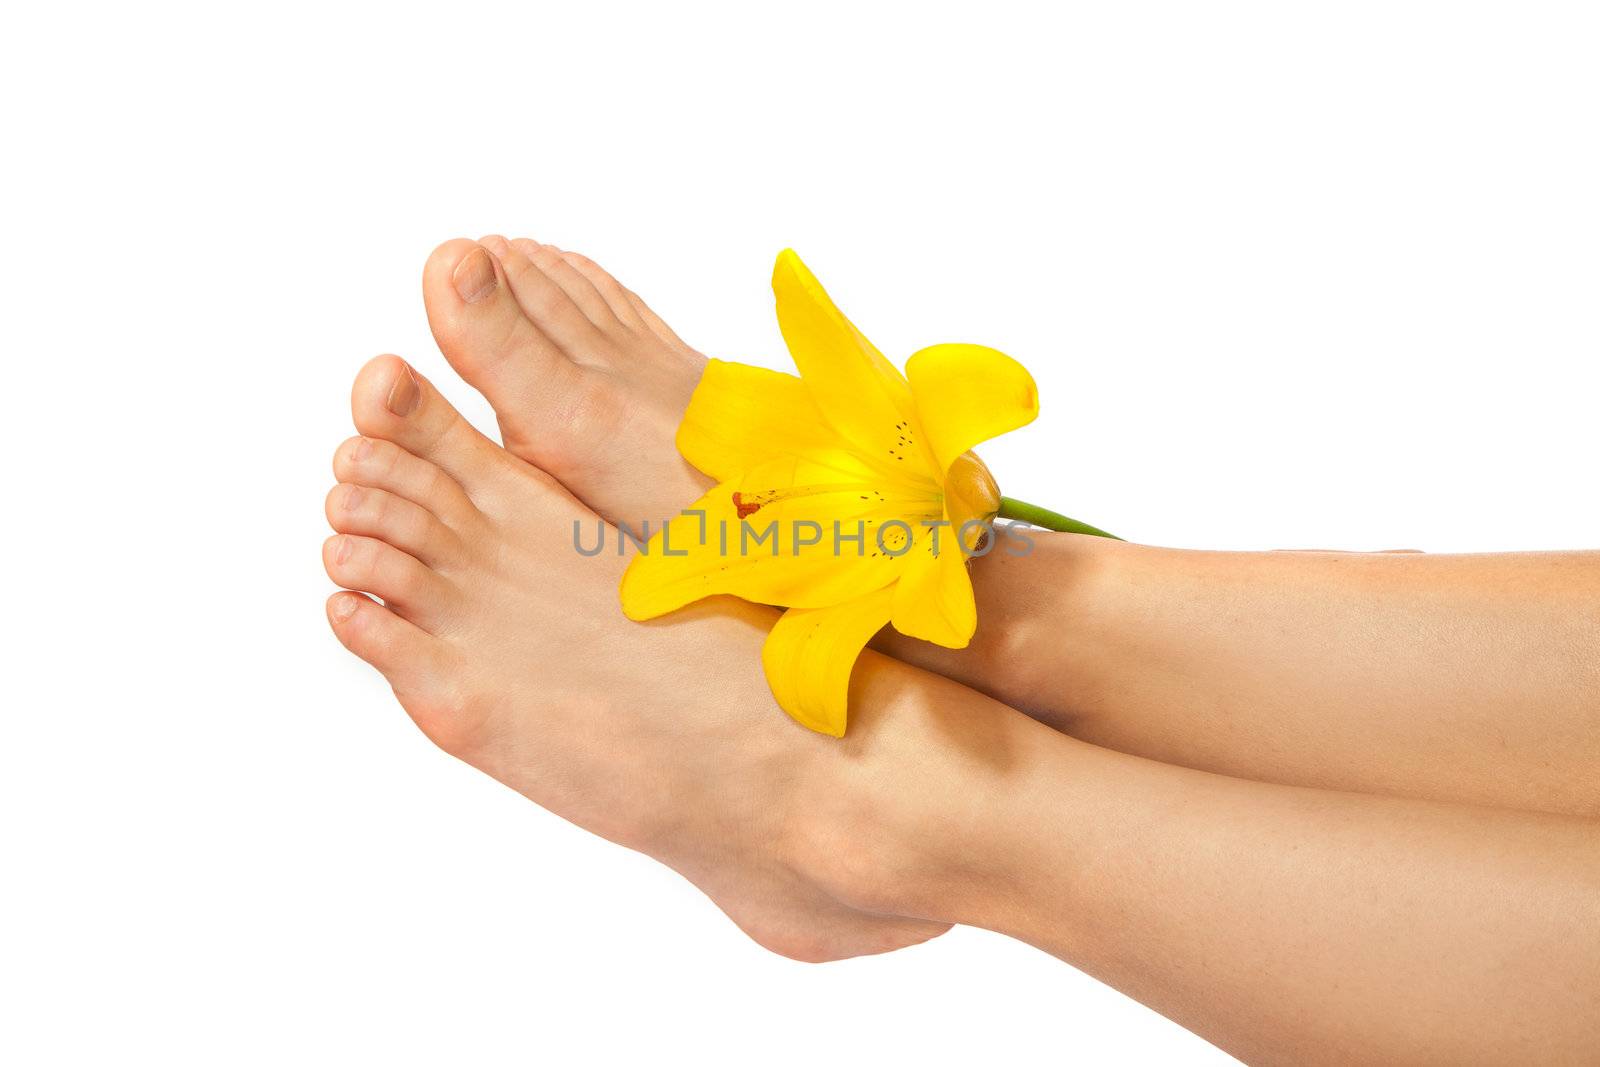 Woman's Feet and legs with flower isolated on white. Manicure and Pedicure concept. Nails. Spa.